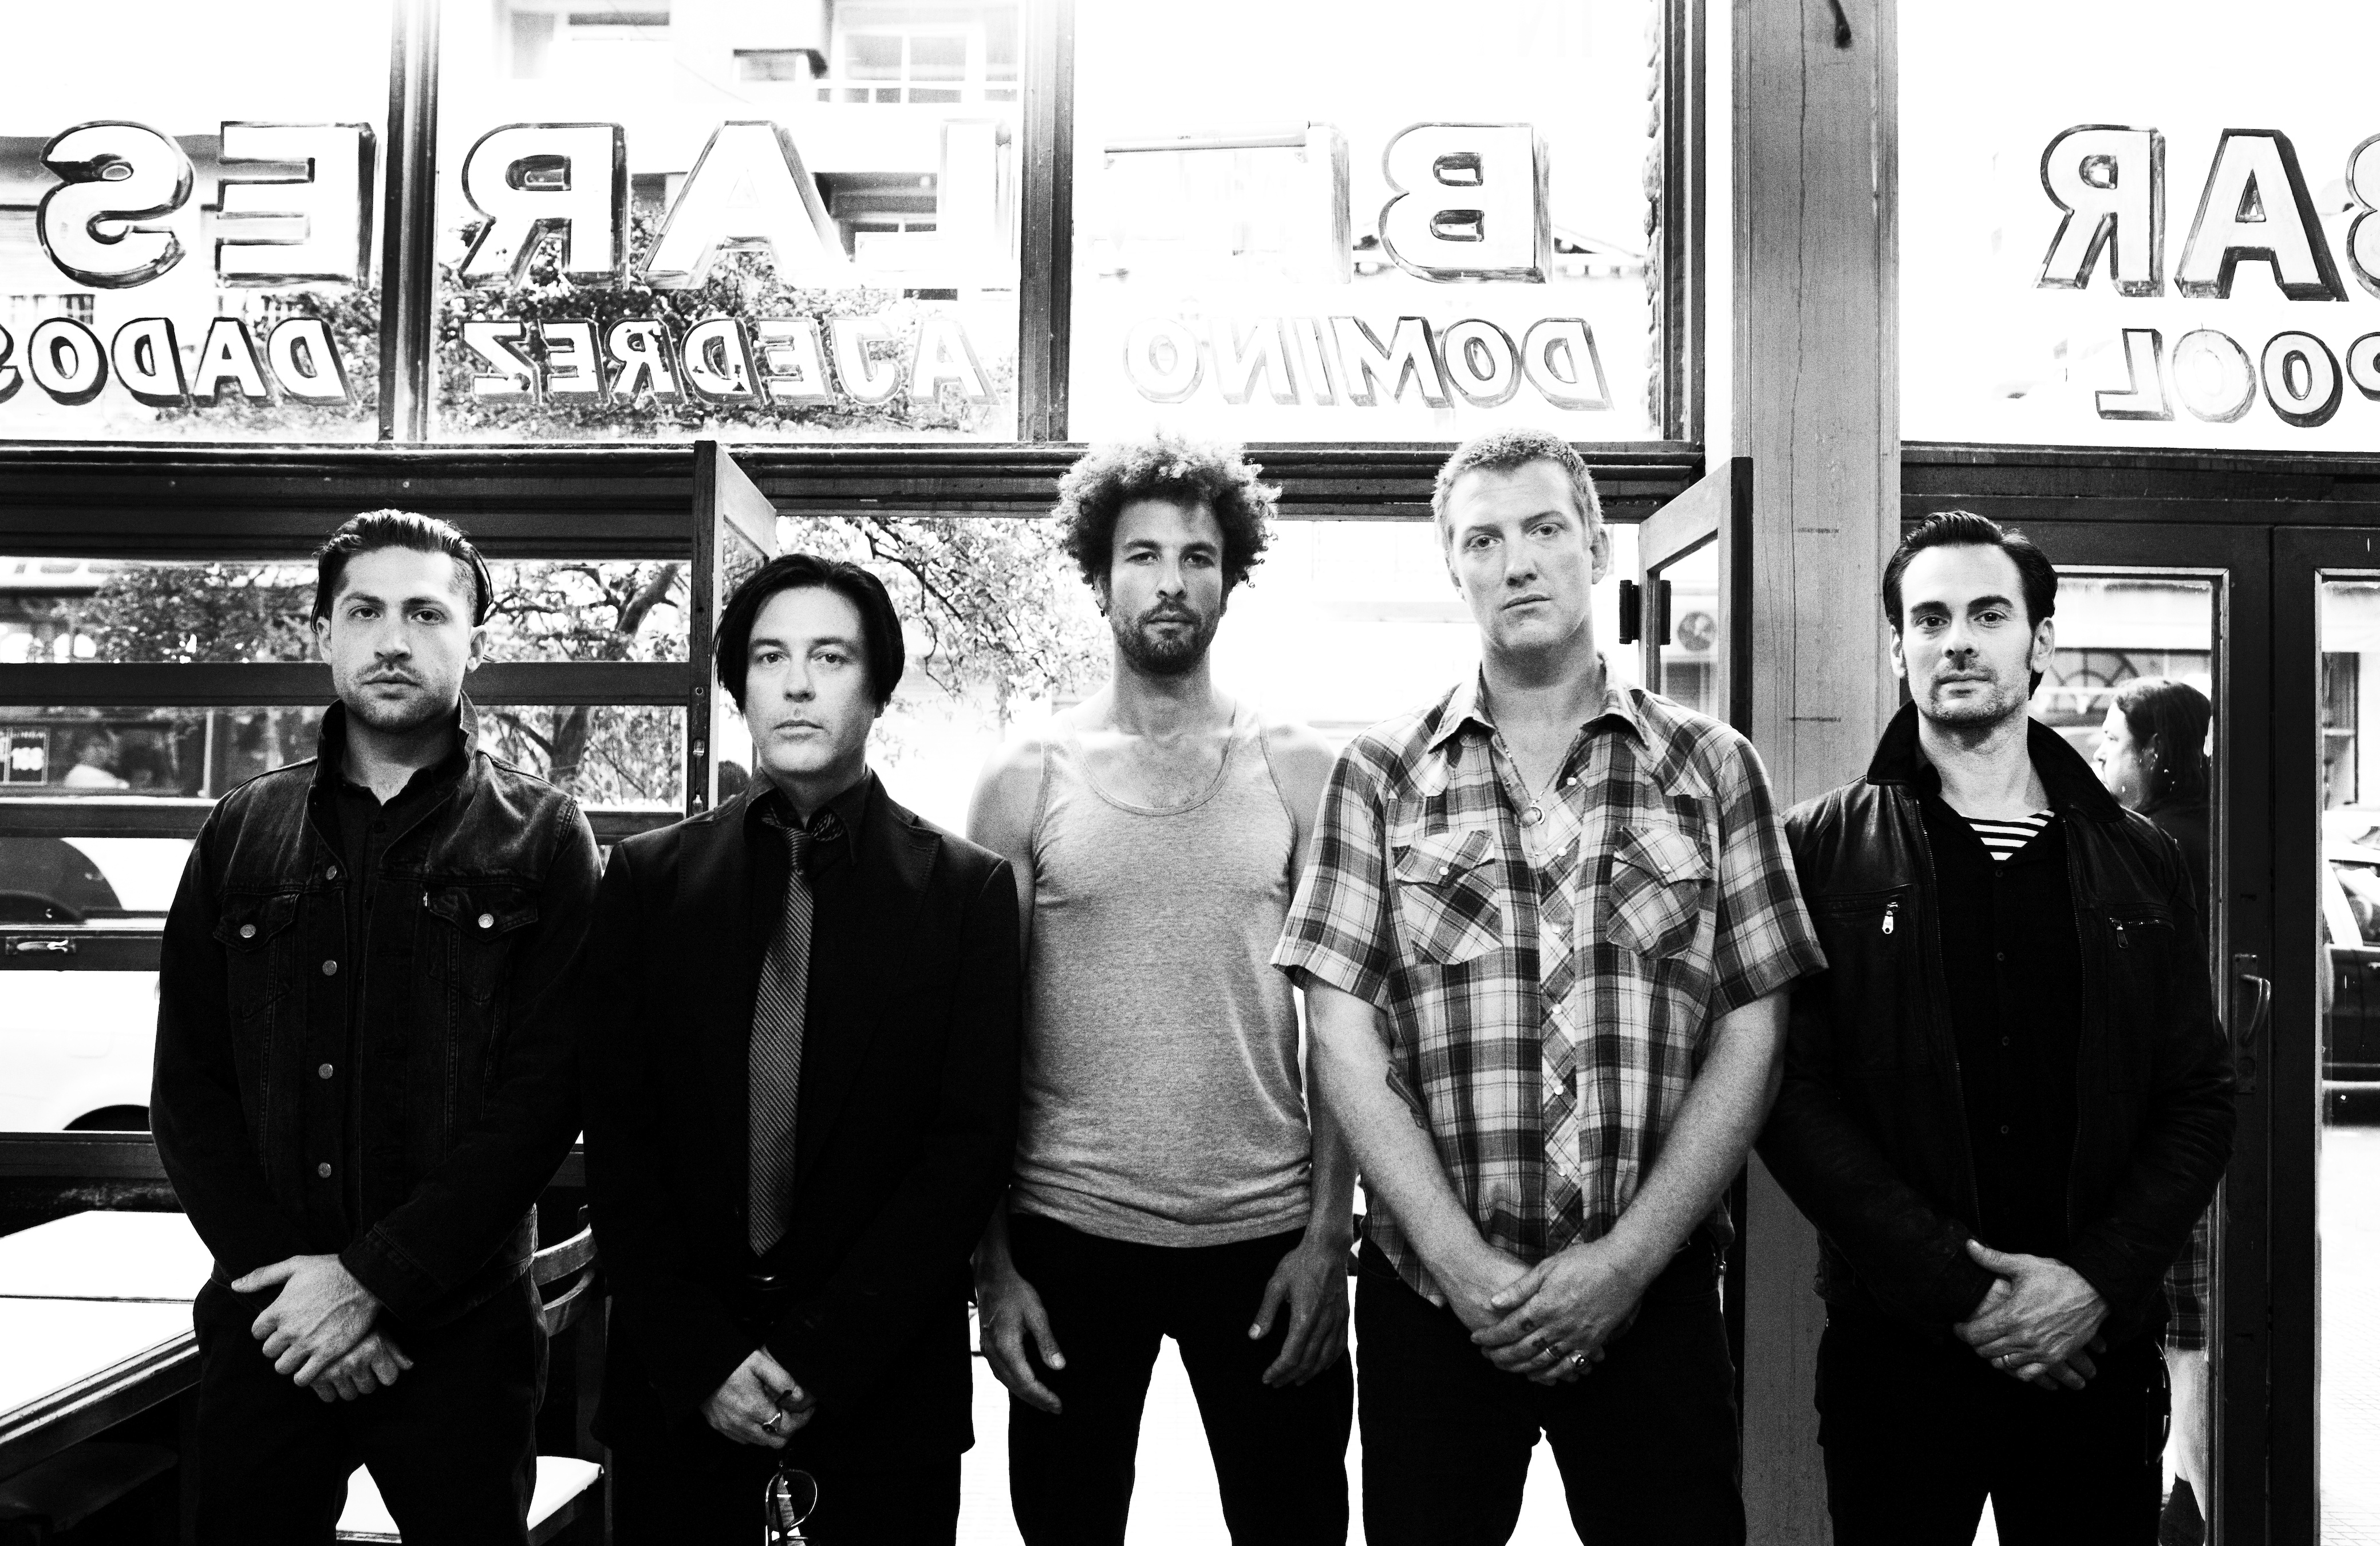 QOTSA (Queens Of The Stone Age) share teaser of their forthcoming Matador release *TK*.